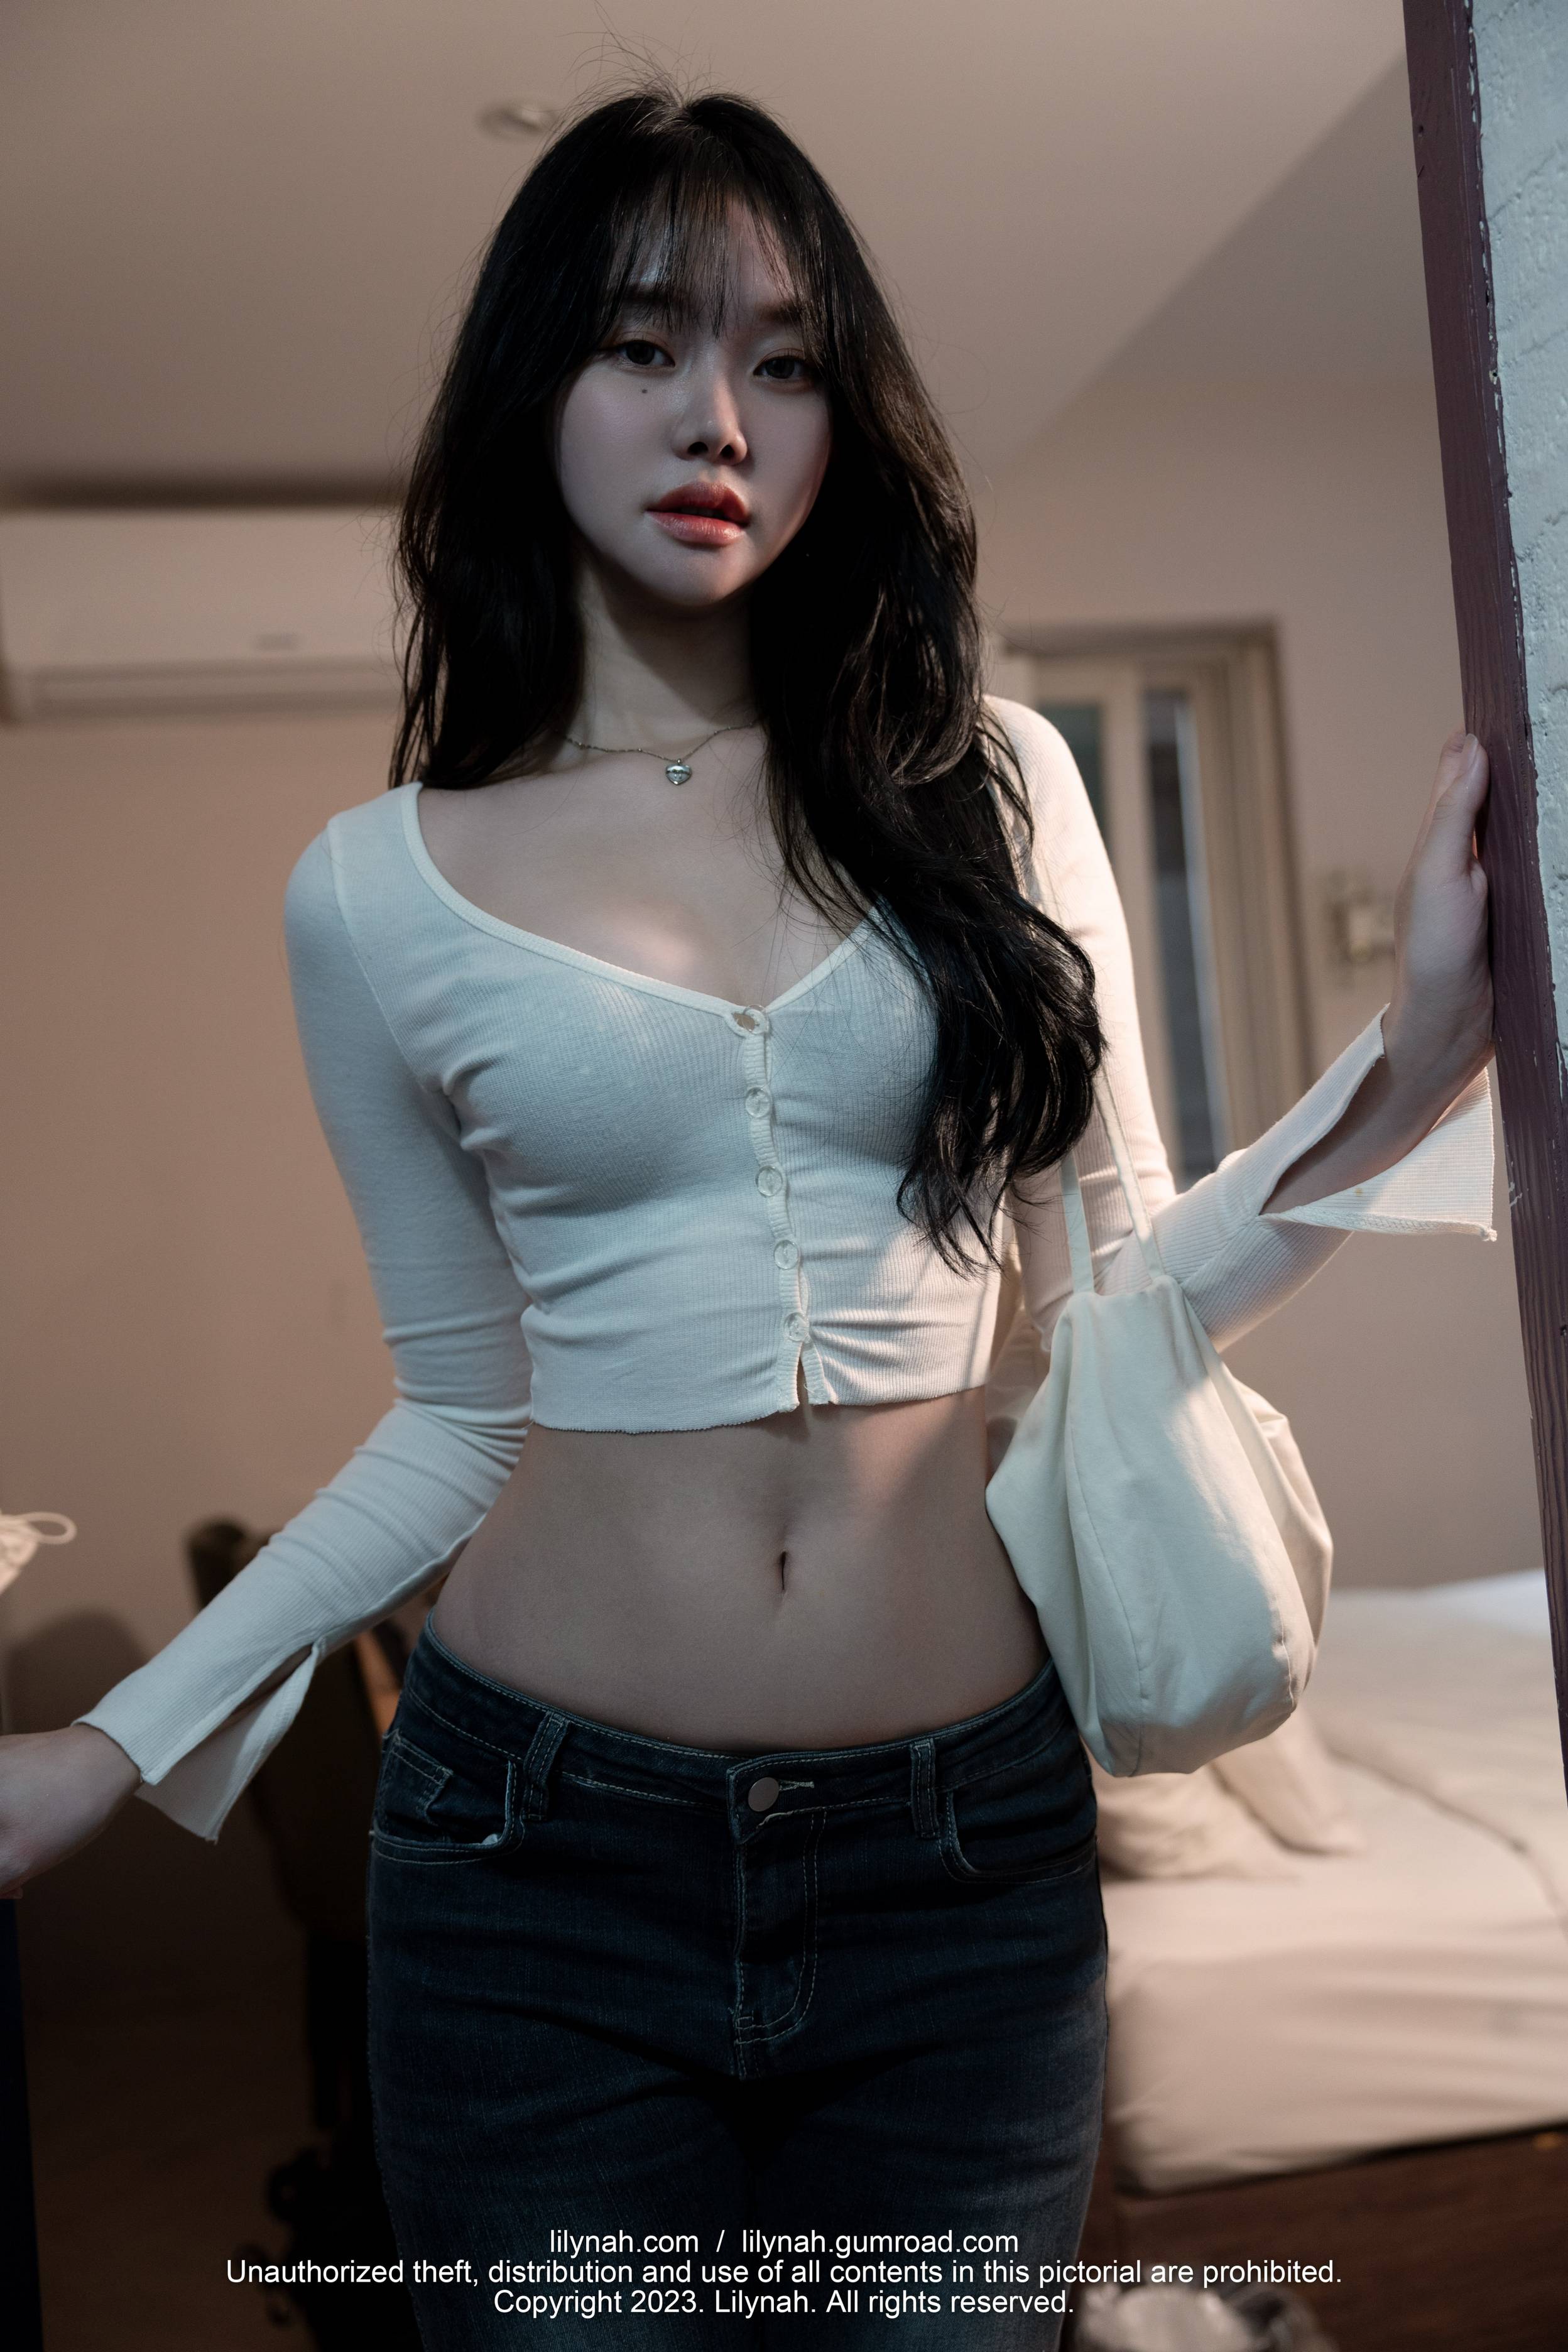 [Lilynah] Inah (이나) Lw081 Vol.34 - My First S